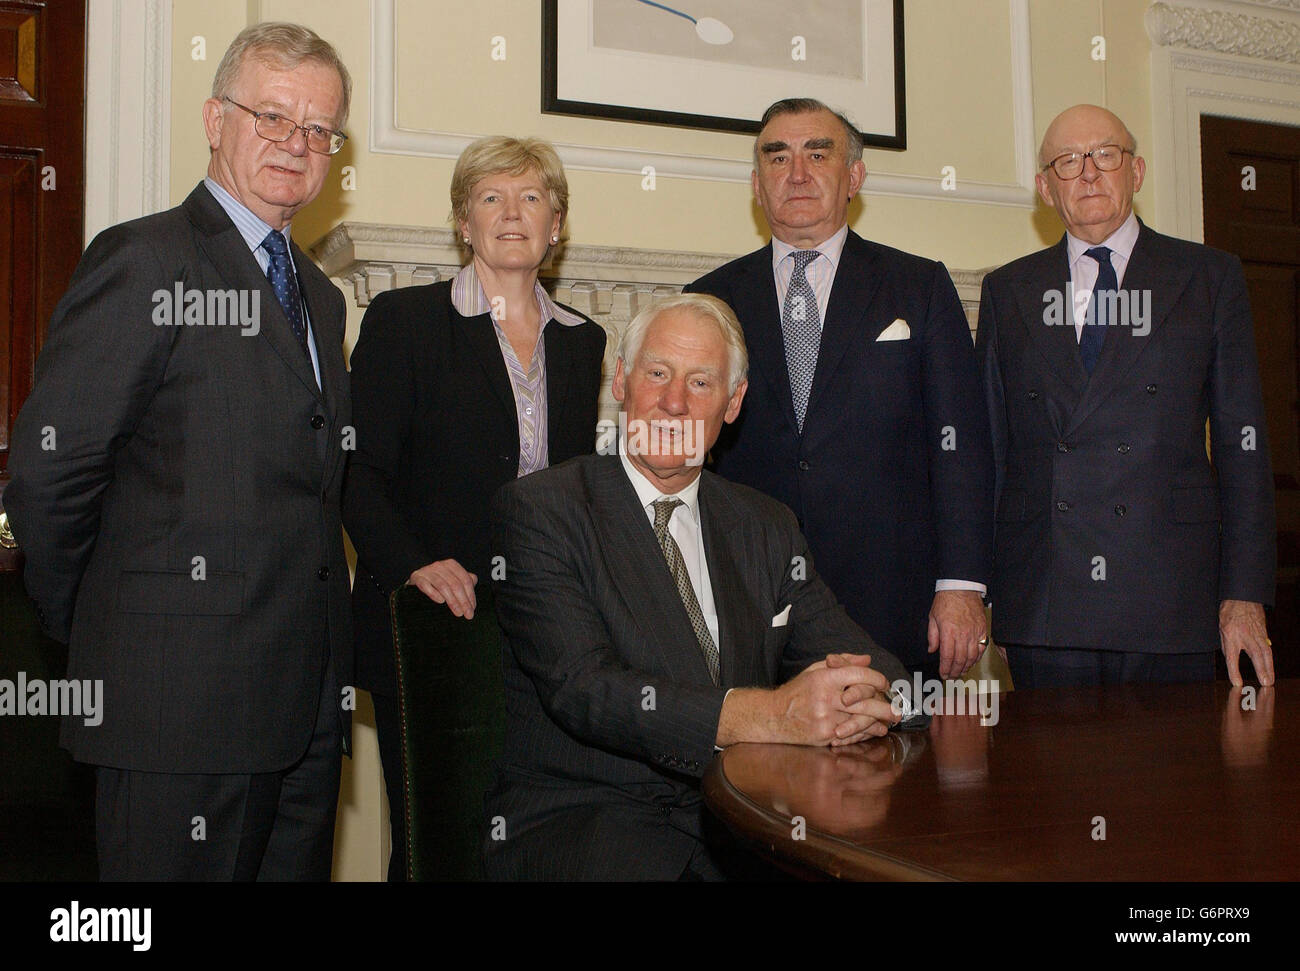 The Committee to Review Intelligence on Weapons of Mass Destruction assemble in London. They are, from left to right, Sir John Chilcot, the Rt Hon Ann Taylor MP for Dewsbury, Committee Chairman, Lord Butler of Brockwell (seated), Michael Mates MP for East Hampshire and Field Marshal Lord Inge. 13/07/2004 Ministers were, Tuesday July 13, 2004, receiving the final version of Lord Butler's report into the use of intelligence in the Iraq war. There is intense speculation that the former Cabinet Secretary's inquiry team will be highly critical of the role played by Britain's intelligence agencies Stock Photo